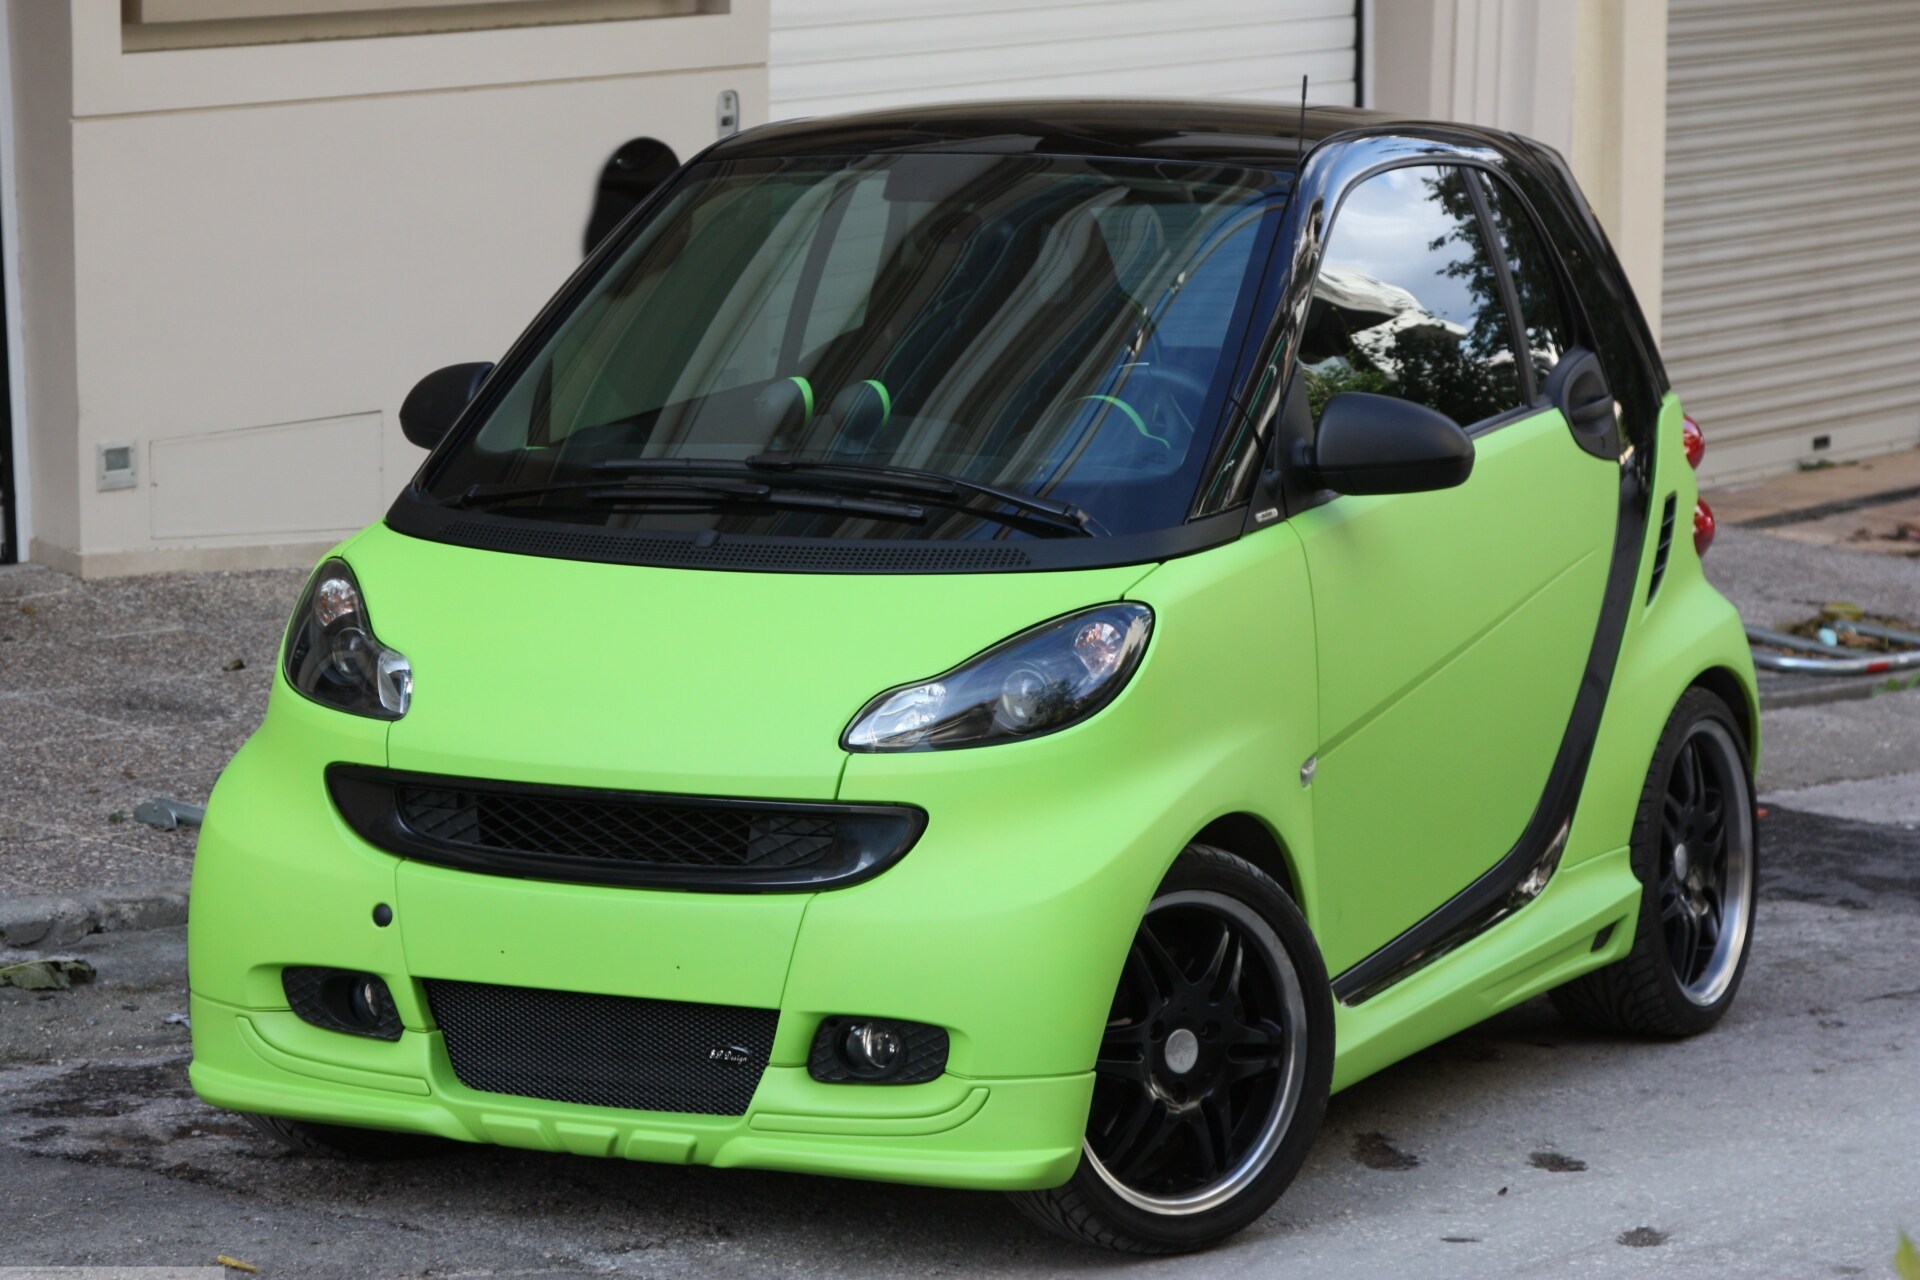 DETAILING SMART FORTWO 